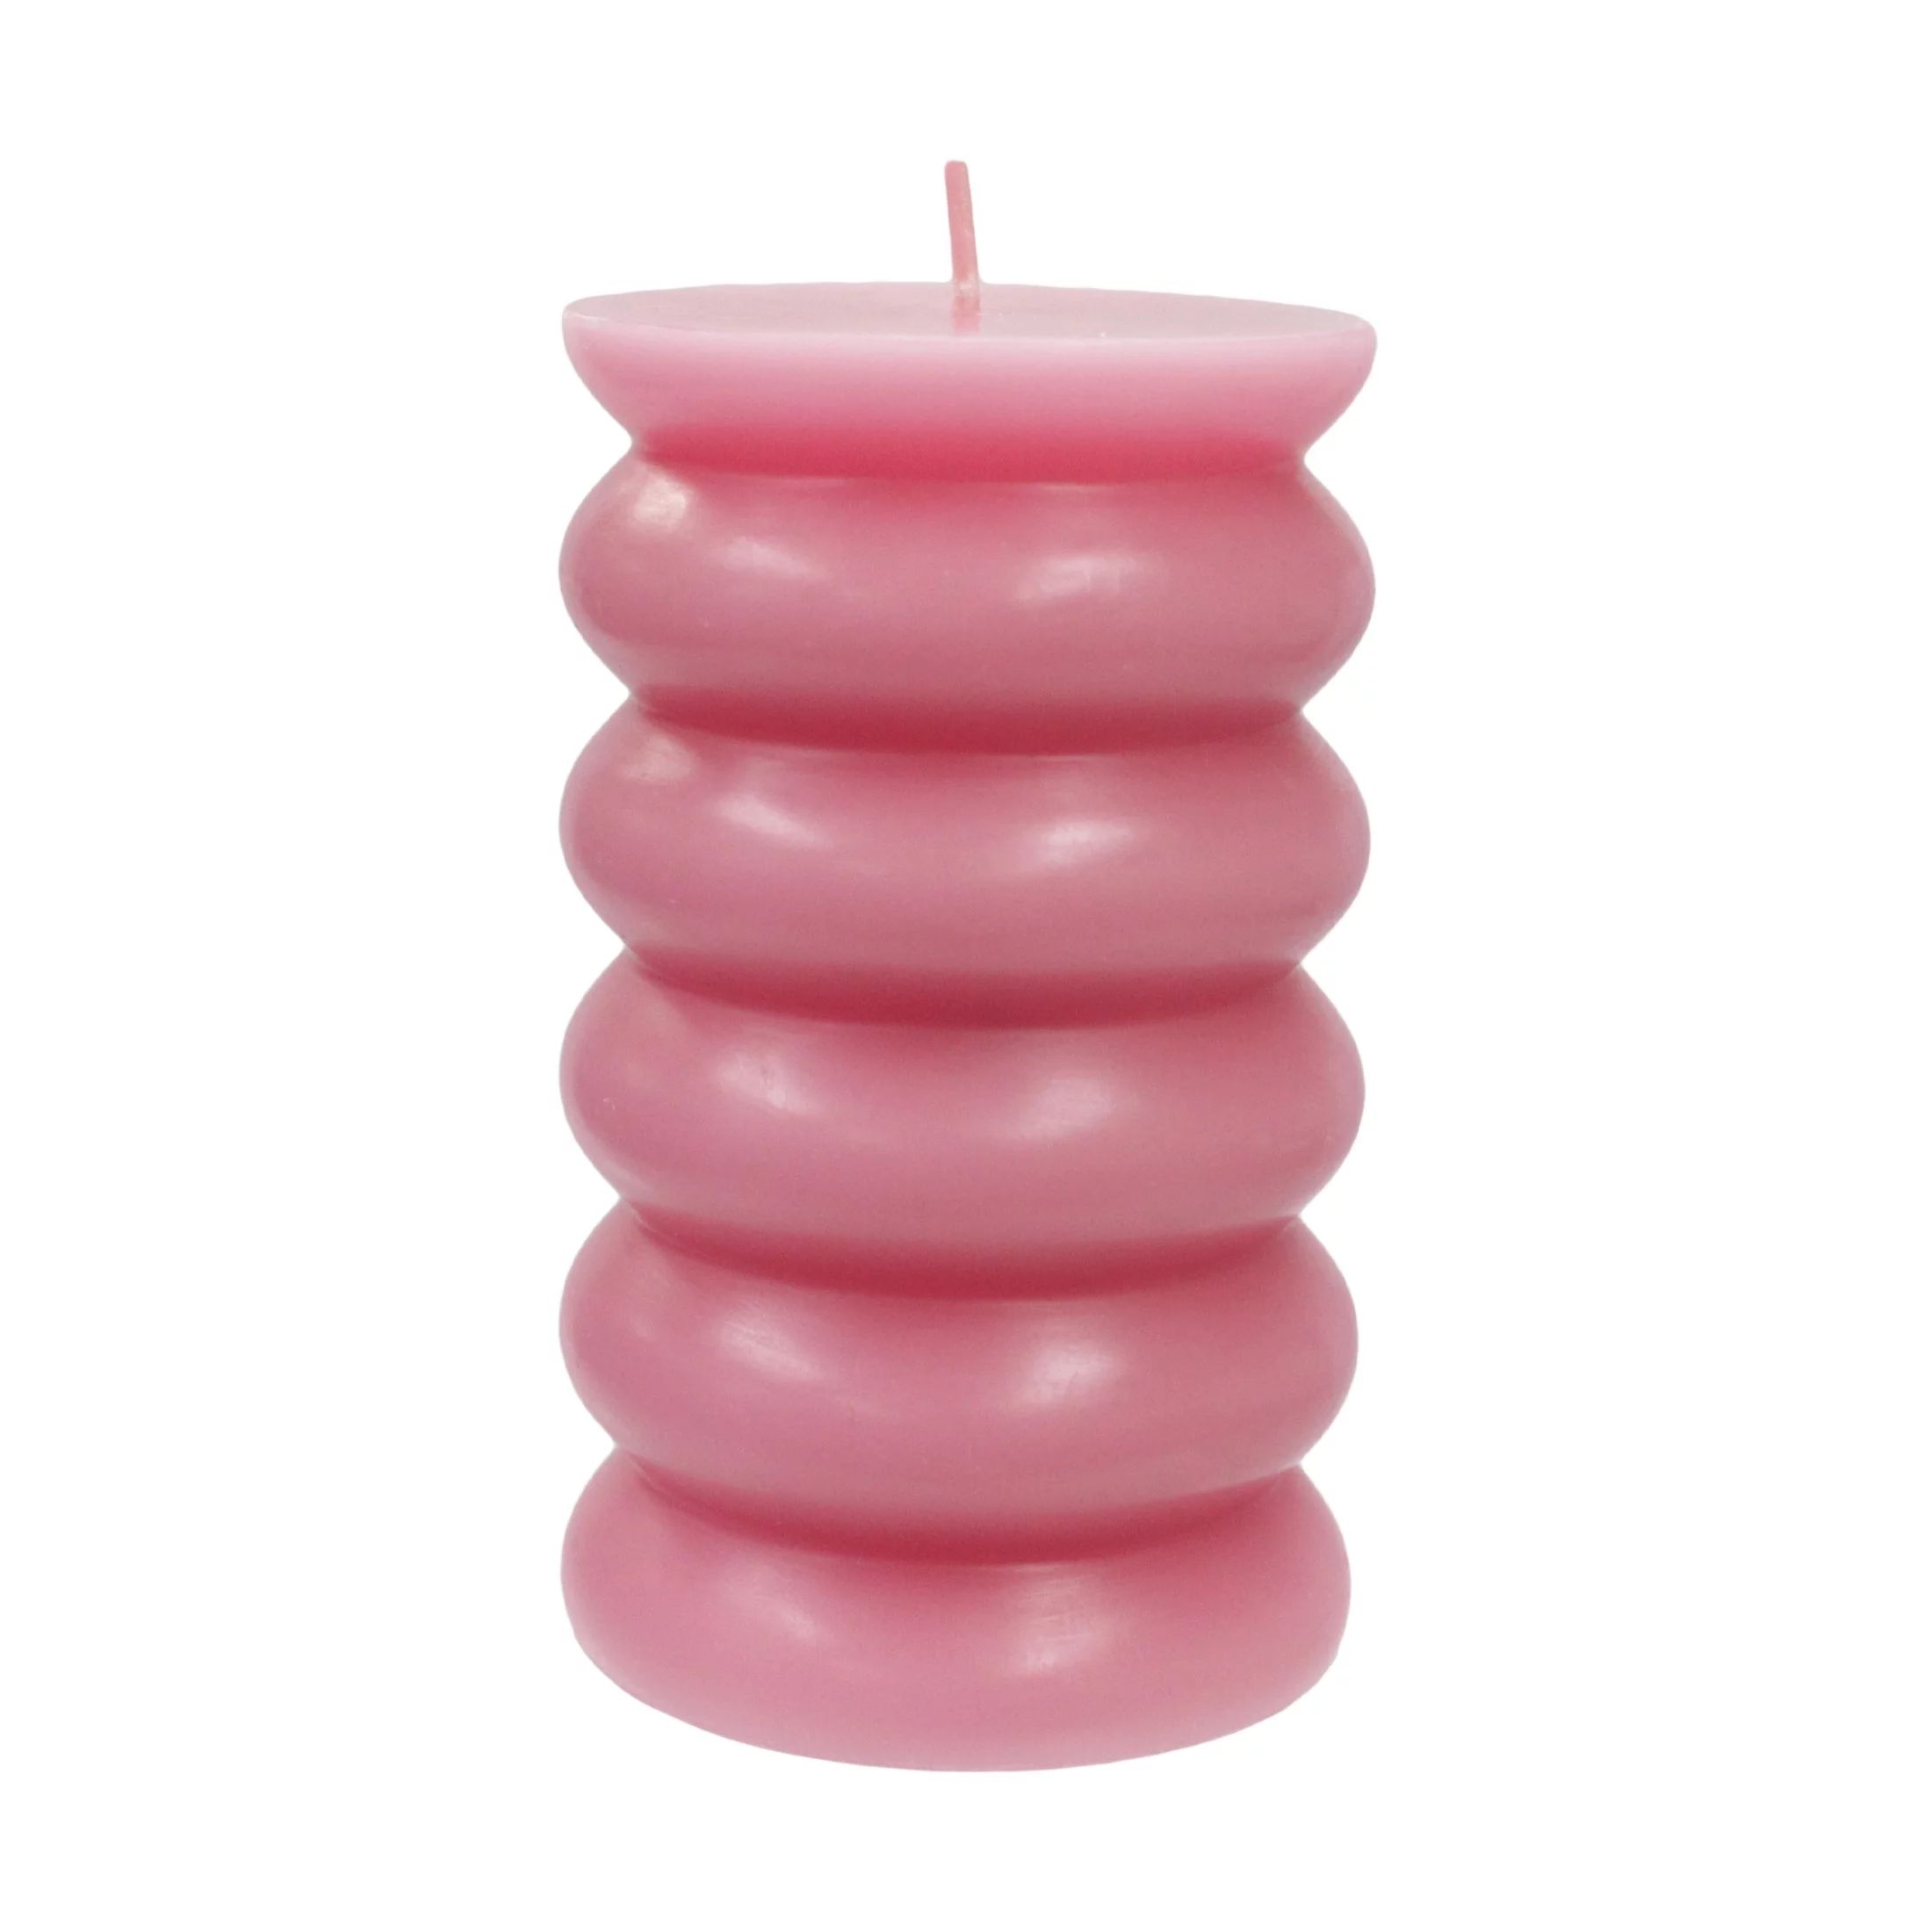 Better Homes & Gardens Unscented Bubble Pillar Candle, 3x5 inches, Pink | Walmart (US)